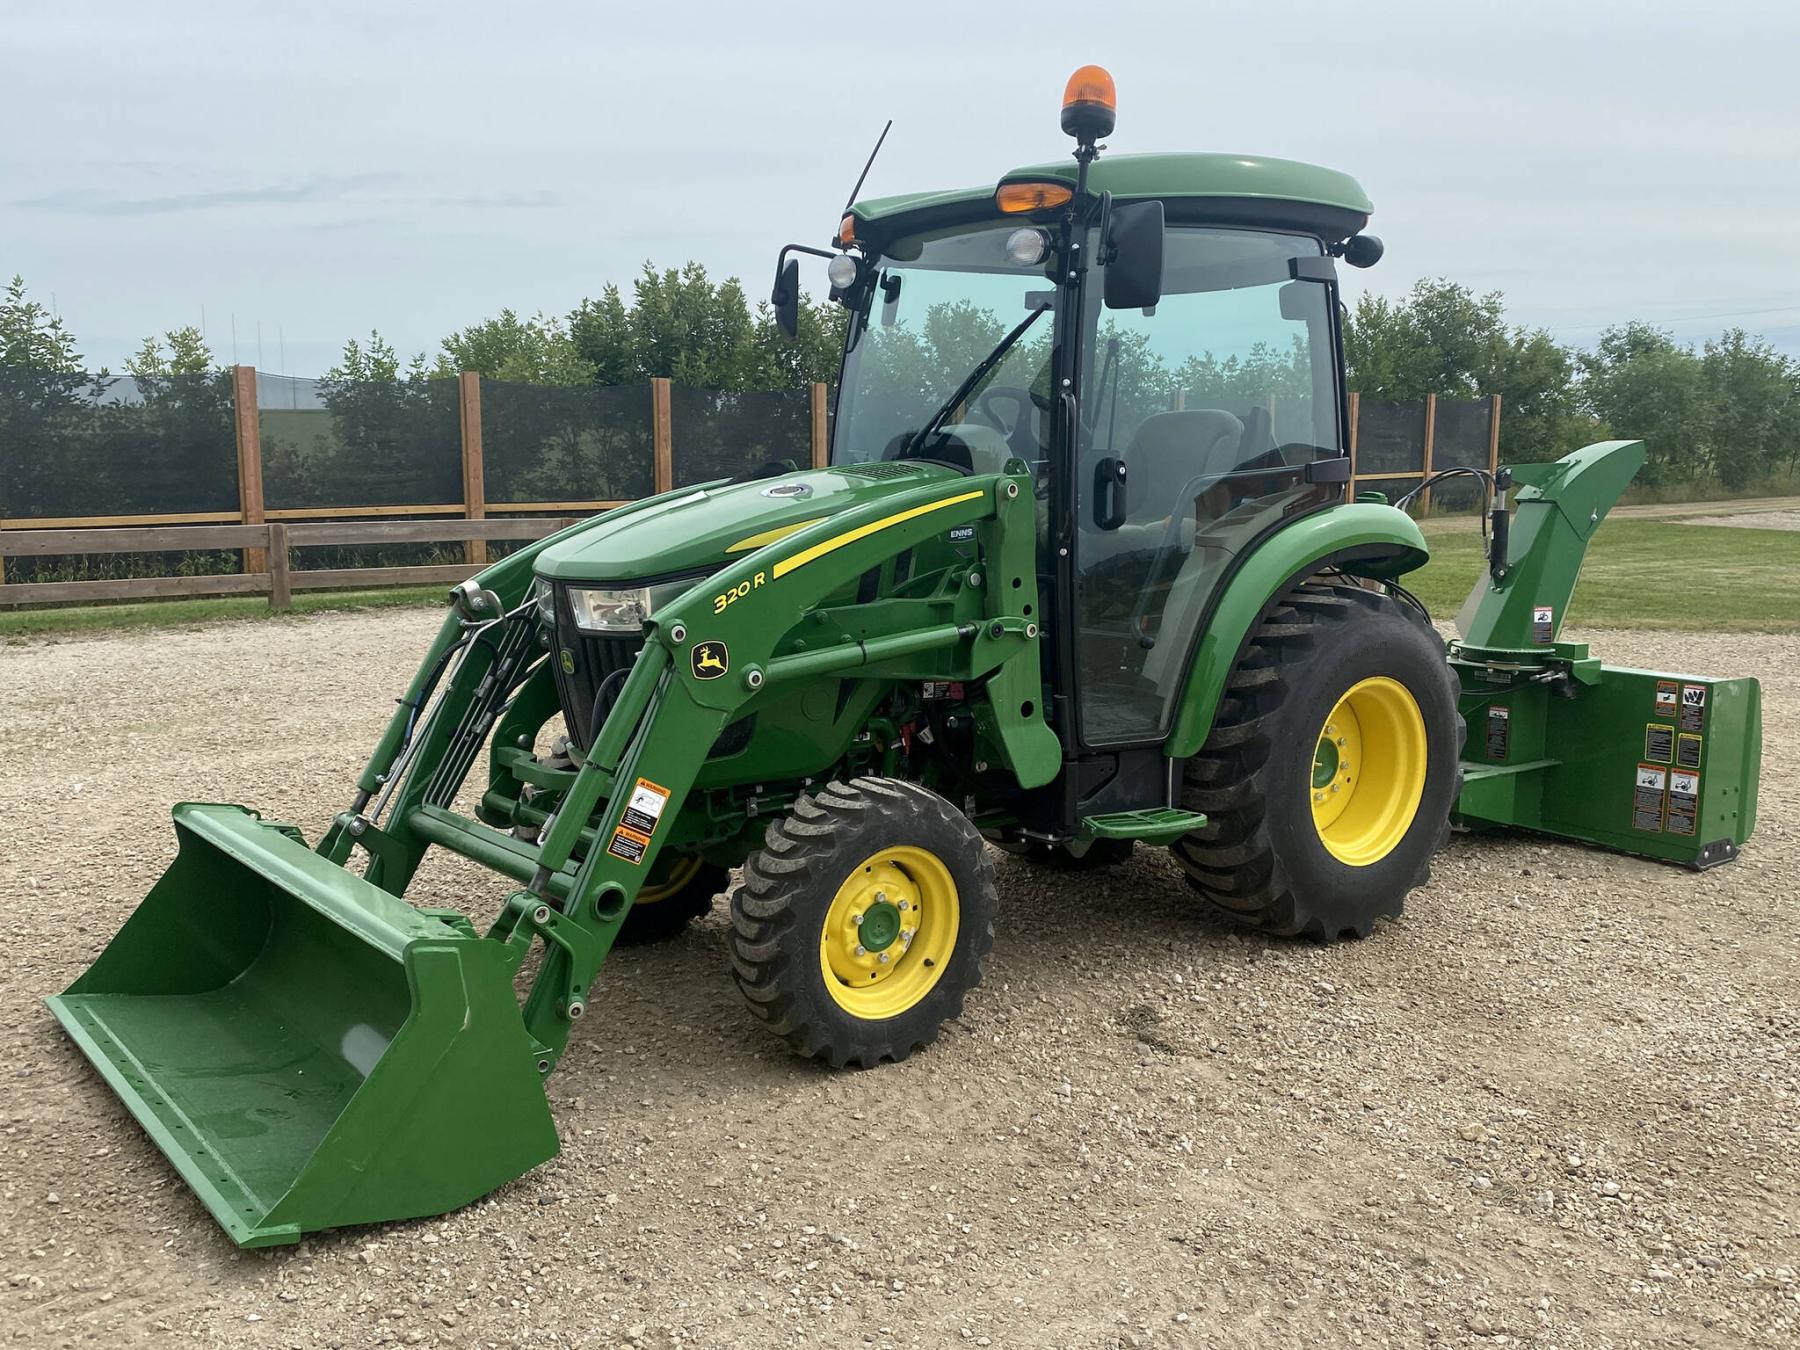  <p>Photos by Marc LaBossiere / Winnipeg Free Press</p>
                                <p>The John Deere 3-Series 3046R is equipped with a climate-controlled cab, 74-inch rear Frontier snowblower, and 54-inch loader bucket.</p> 